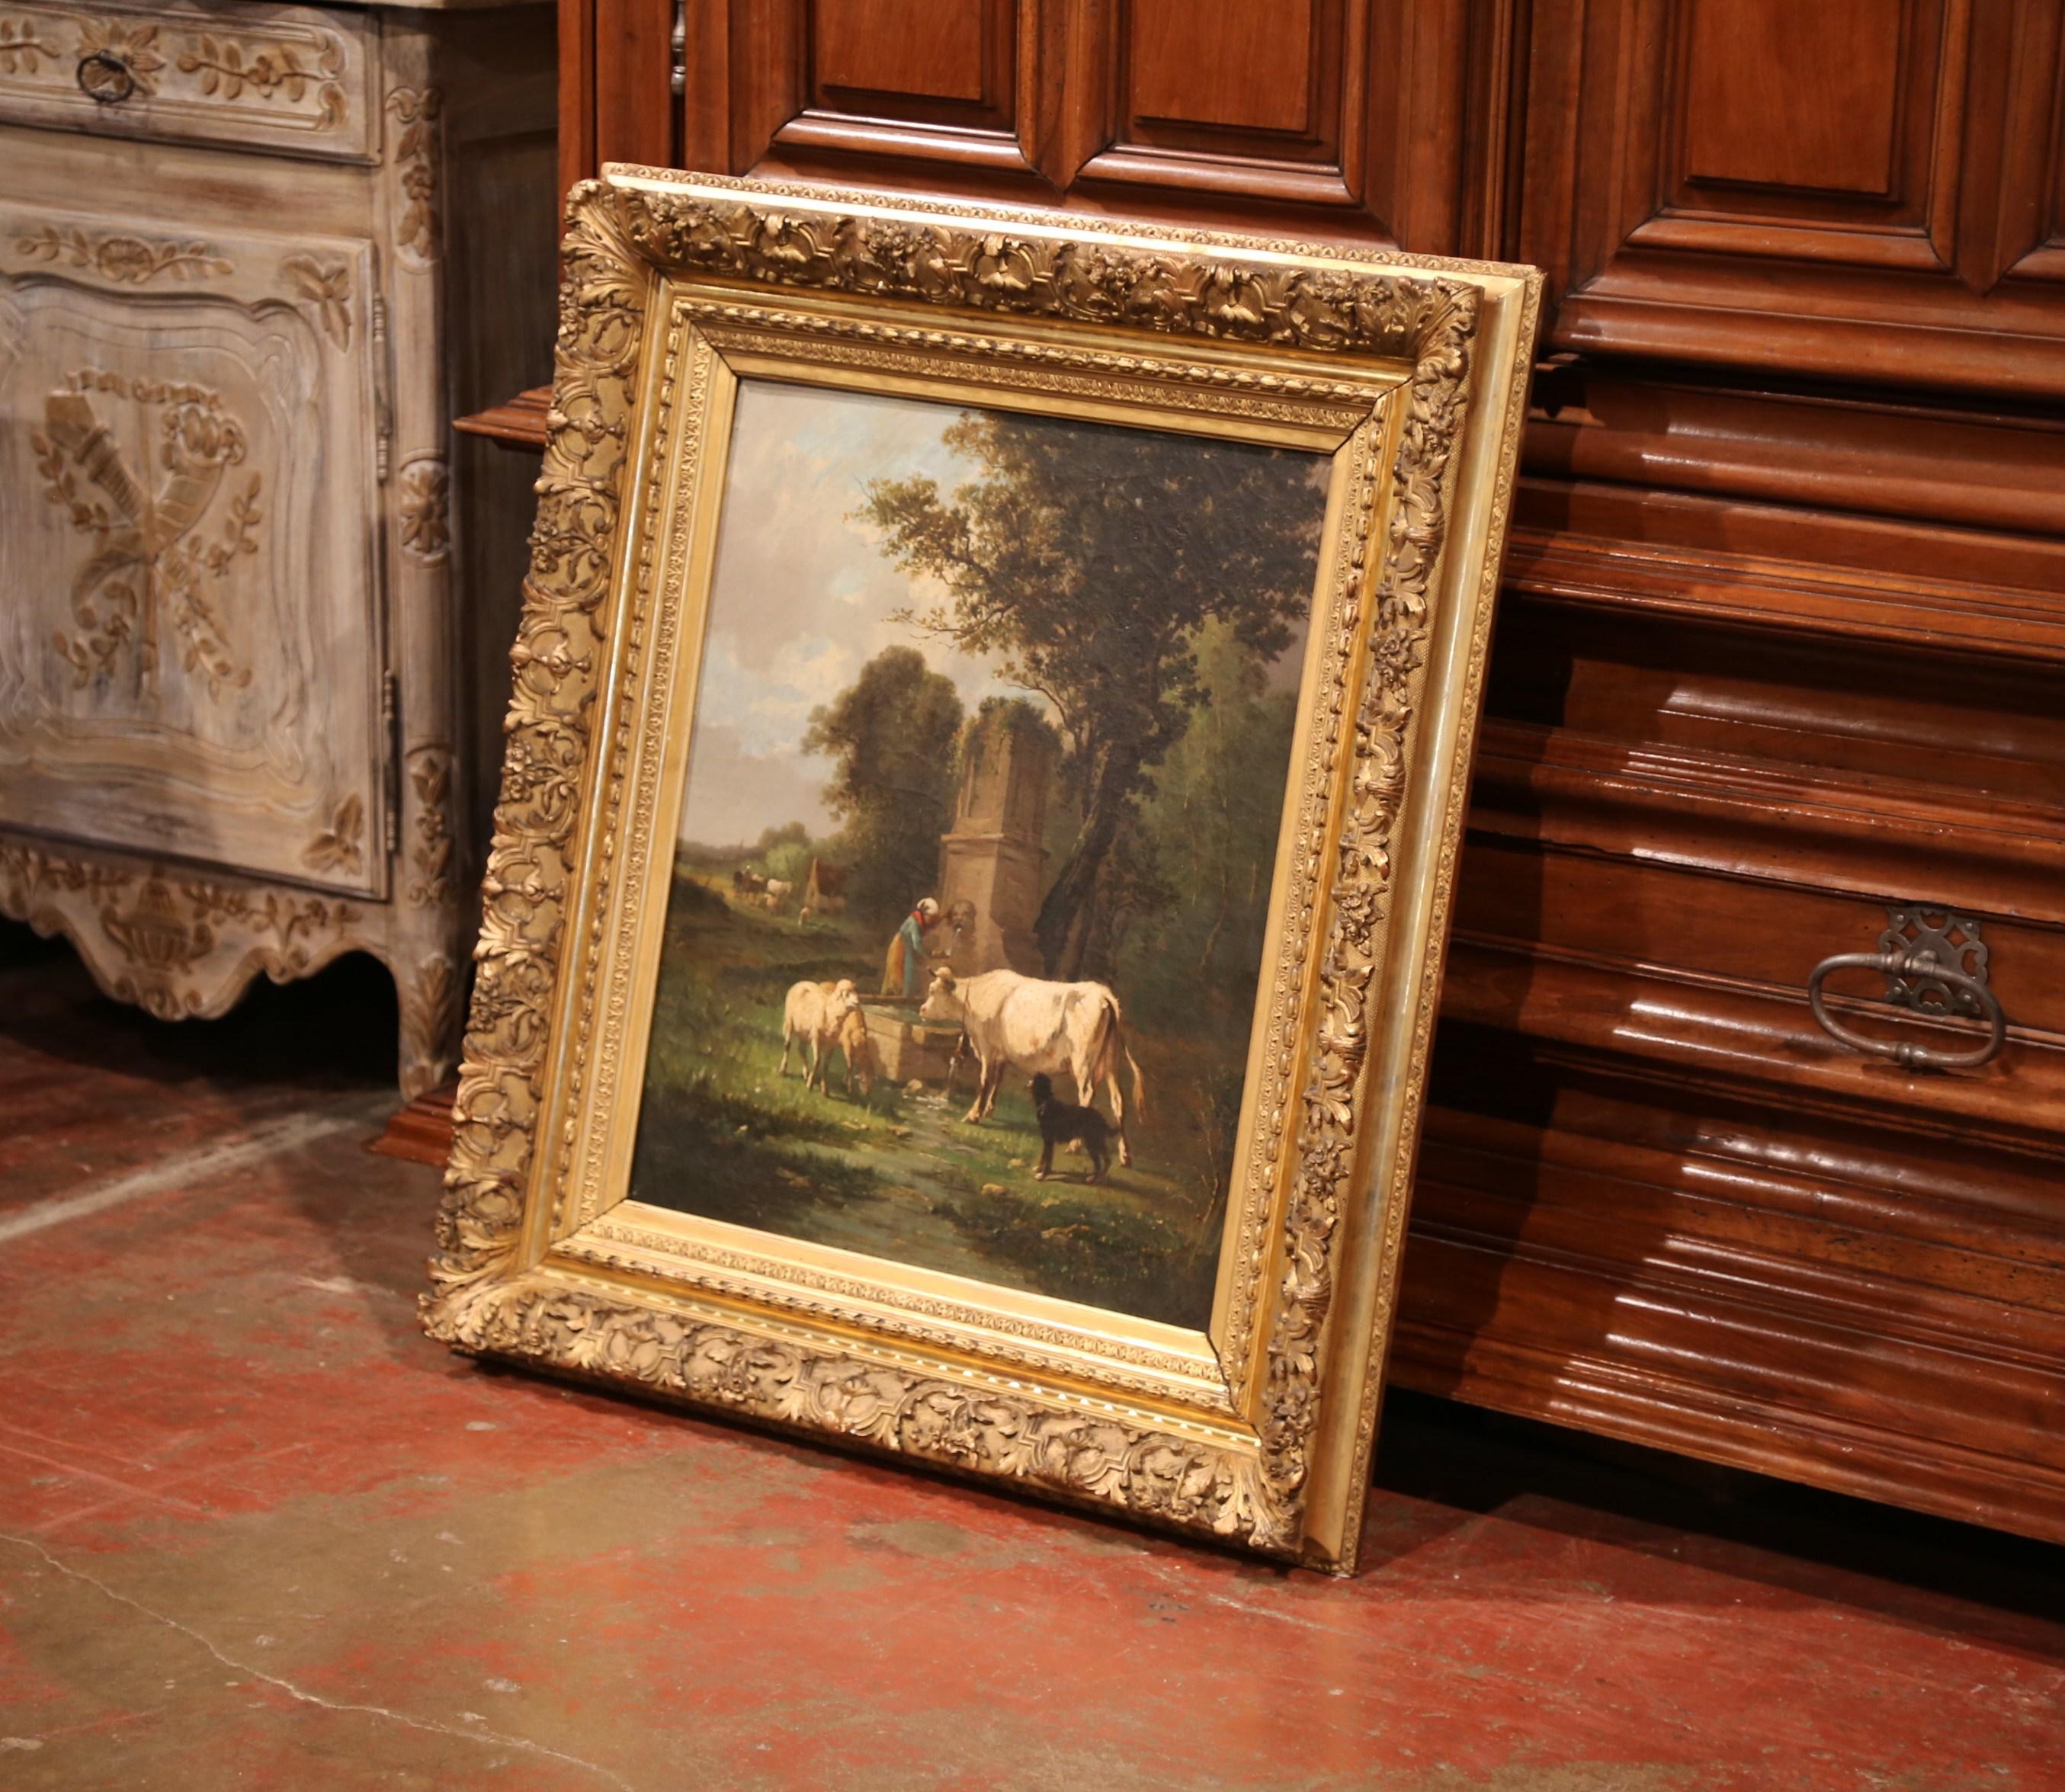 This exquisite oil on canvas pastoral painting was created in Spain circa 1860; set inside the original carved gilt frame, the painting depicts a pastoral scene featuring a farmer getting water from a stone fountain with sheep, cows and dog